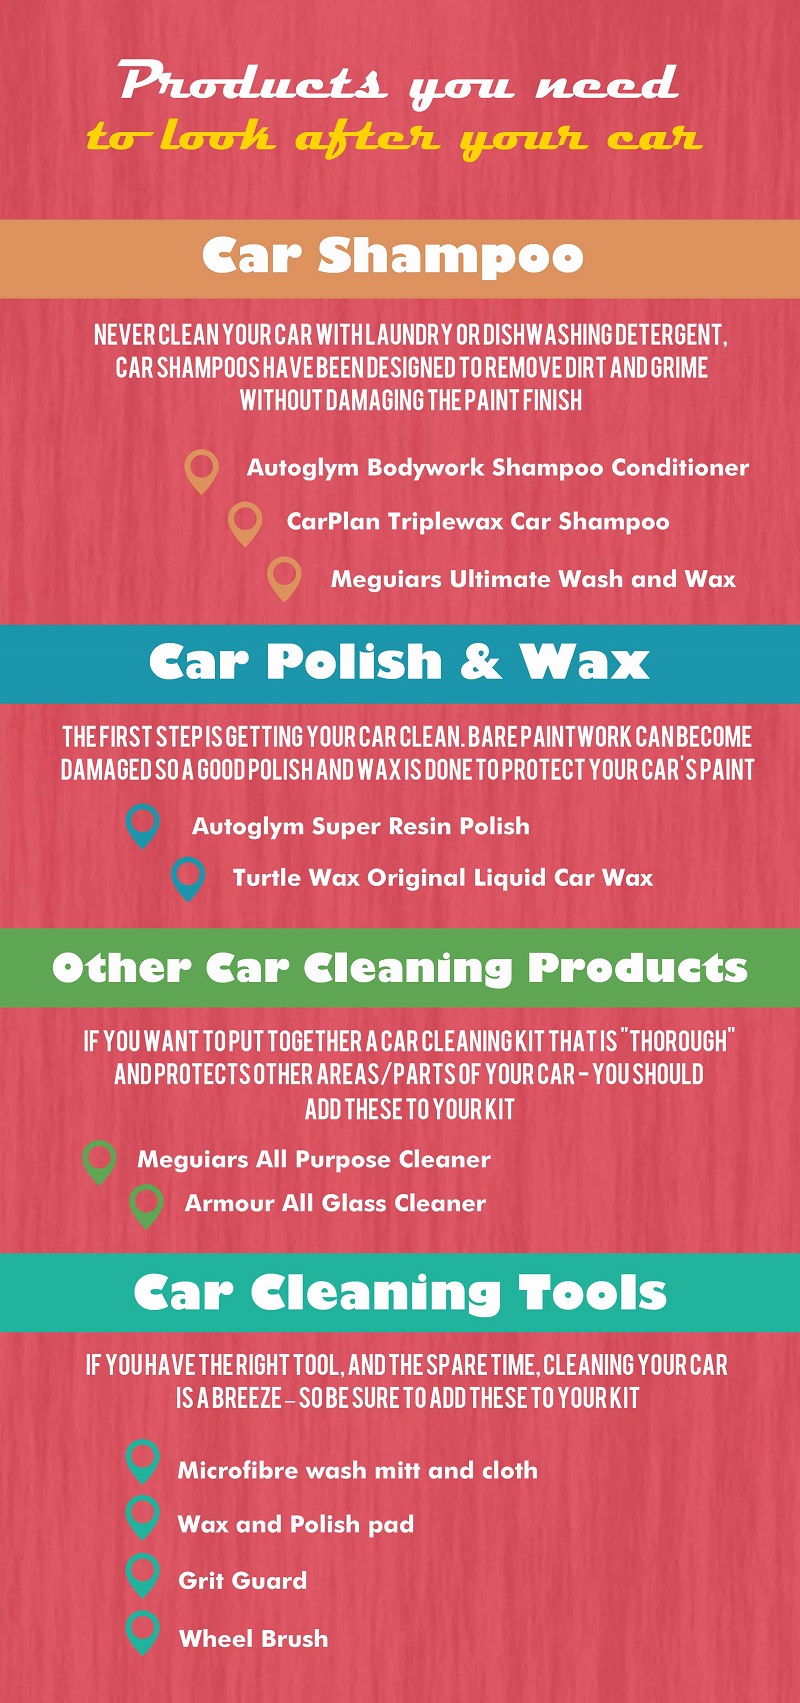 Infographics - Essential car detailing products - Car Shampoo, Car Polish and Wax, Multi purpose cleaners, glass cleaners etc